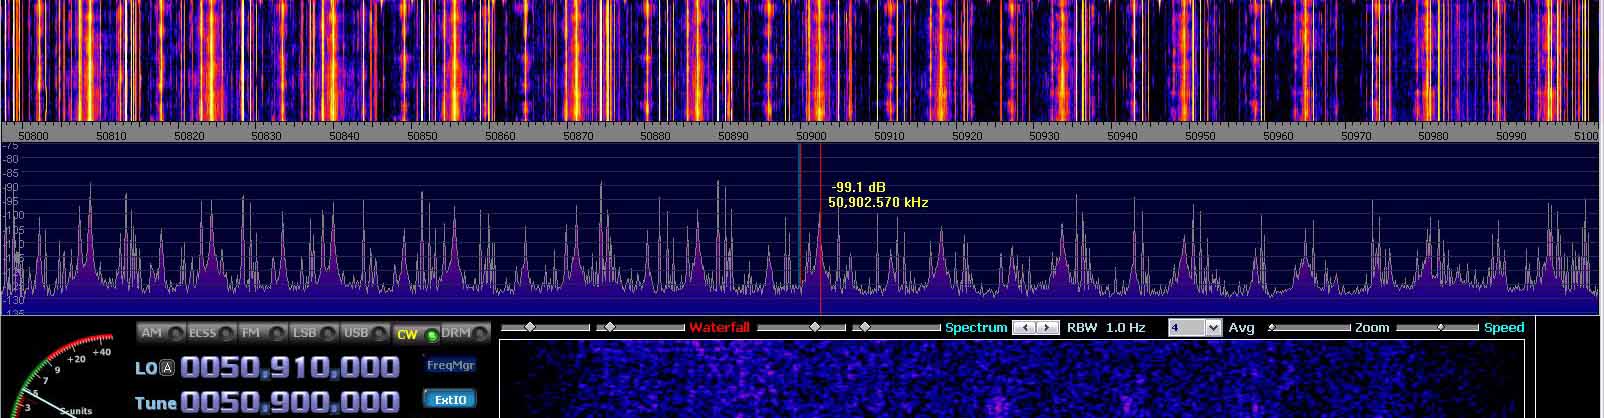 2014-07-04 50.900 MHz +- 100 kHz - Strong Es - 4-el dipole array with ends to St P - (c) OH7HJ.JPG